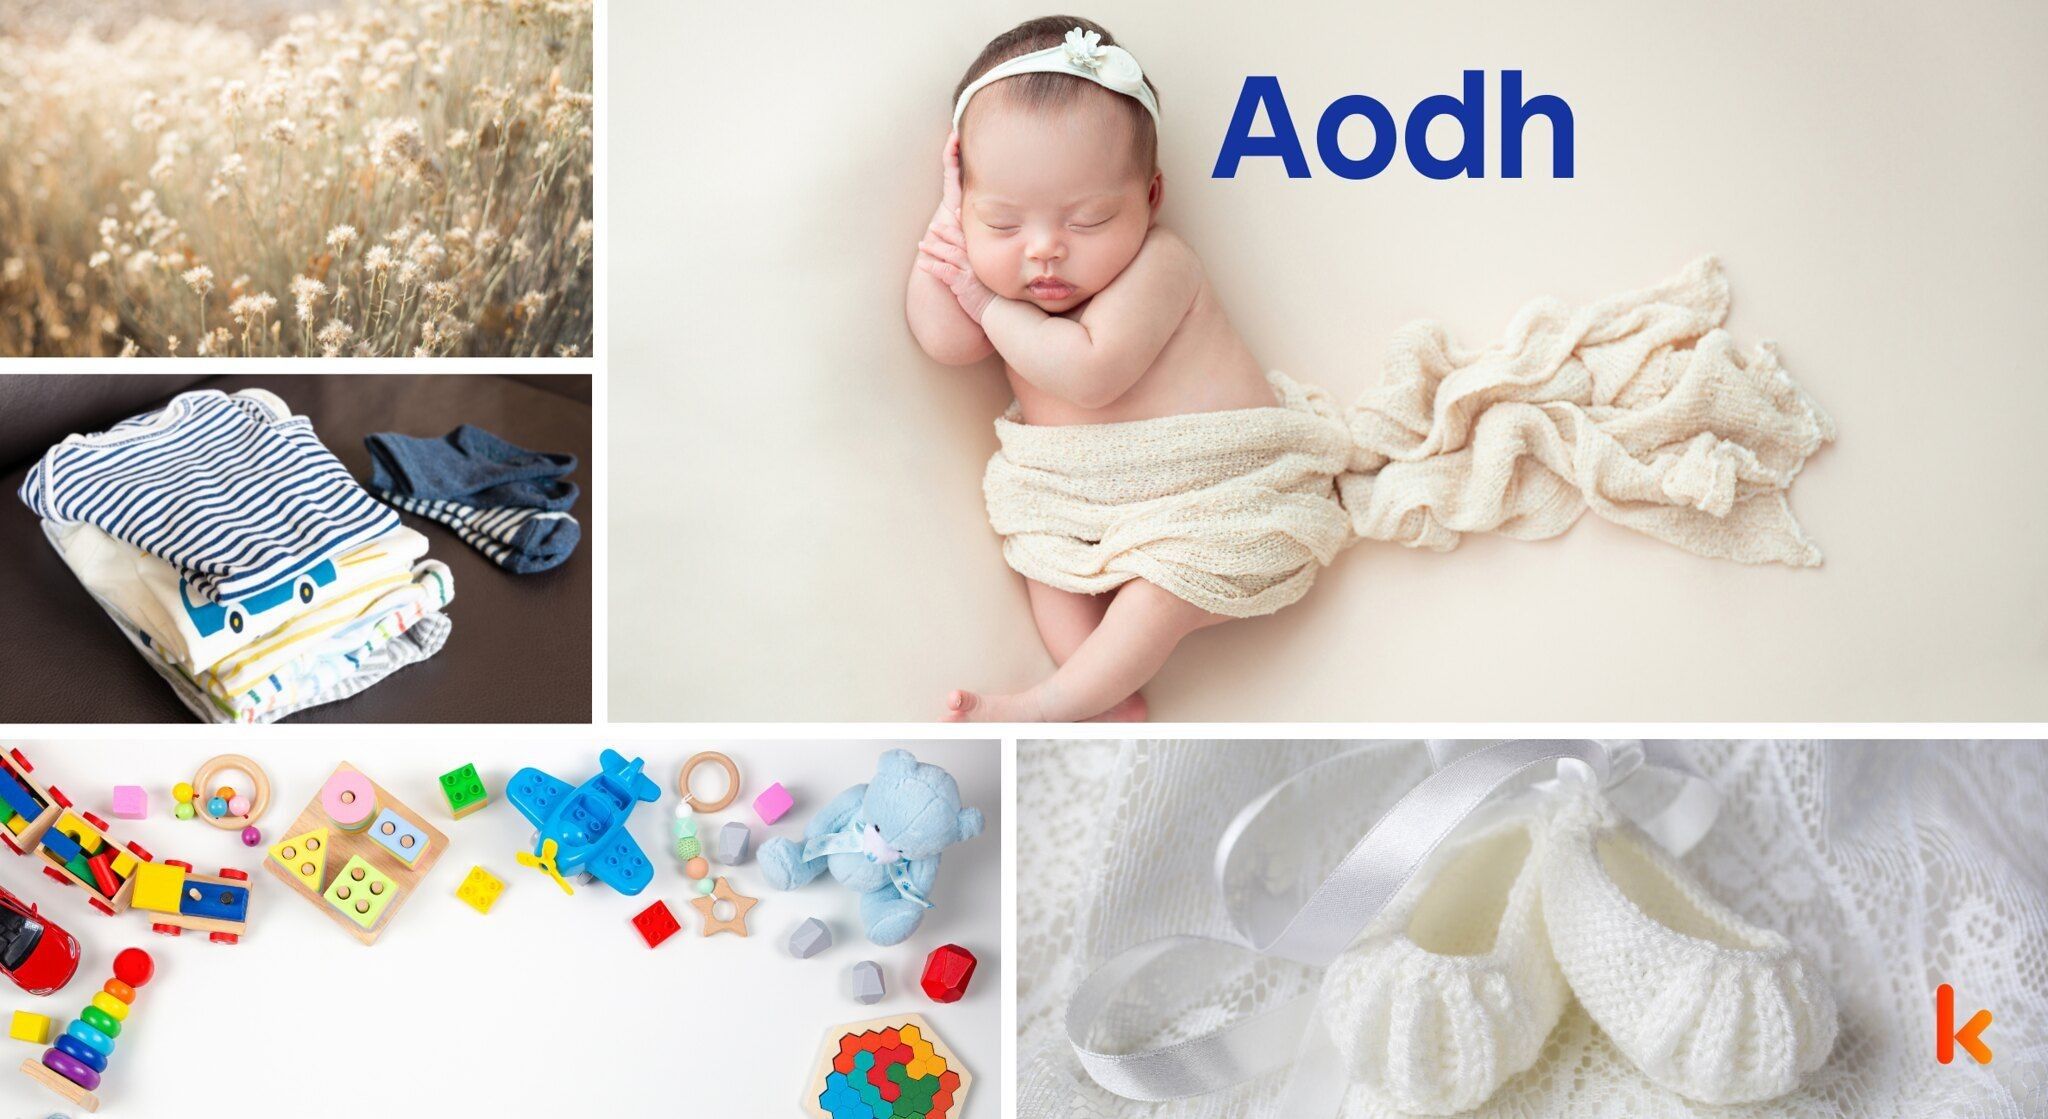 Meaning of the name Aodh